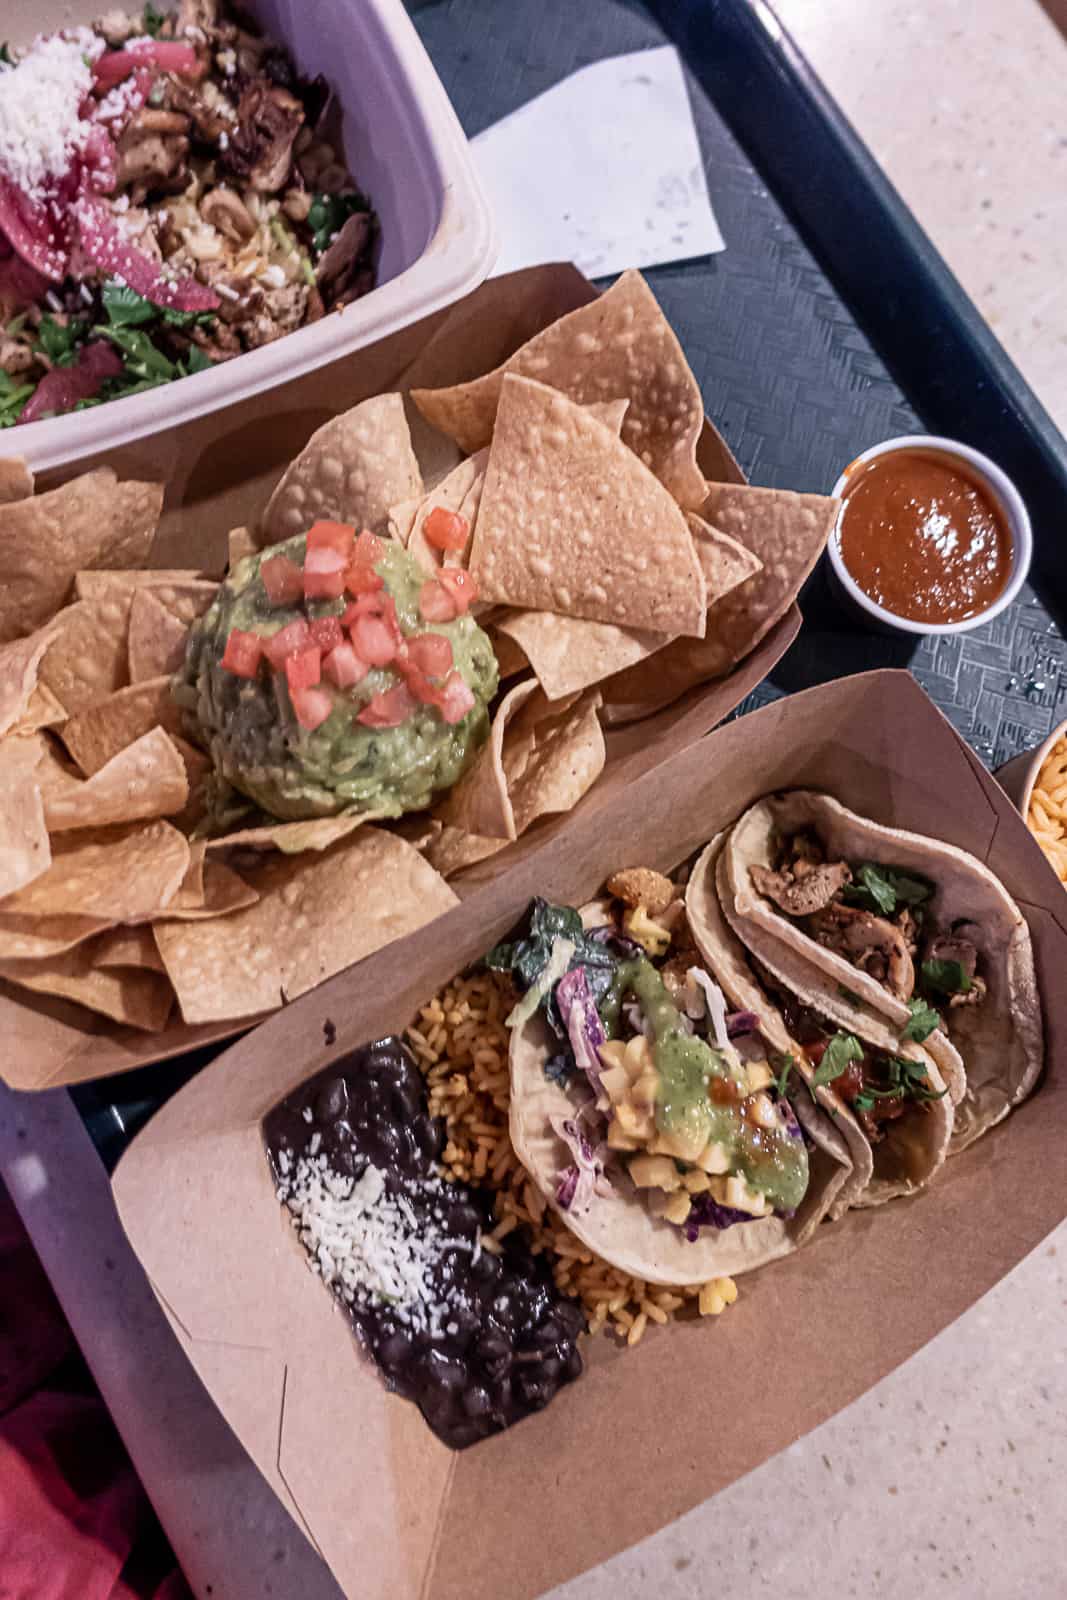 Tray of Quick Service Disney World Food at Mexico Pavilion